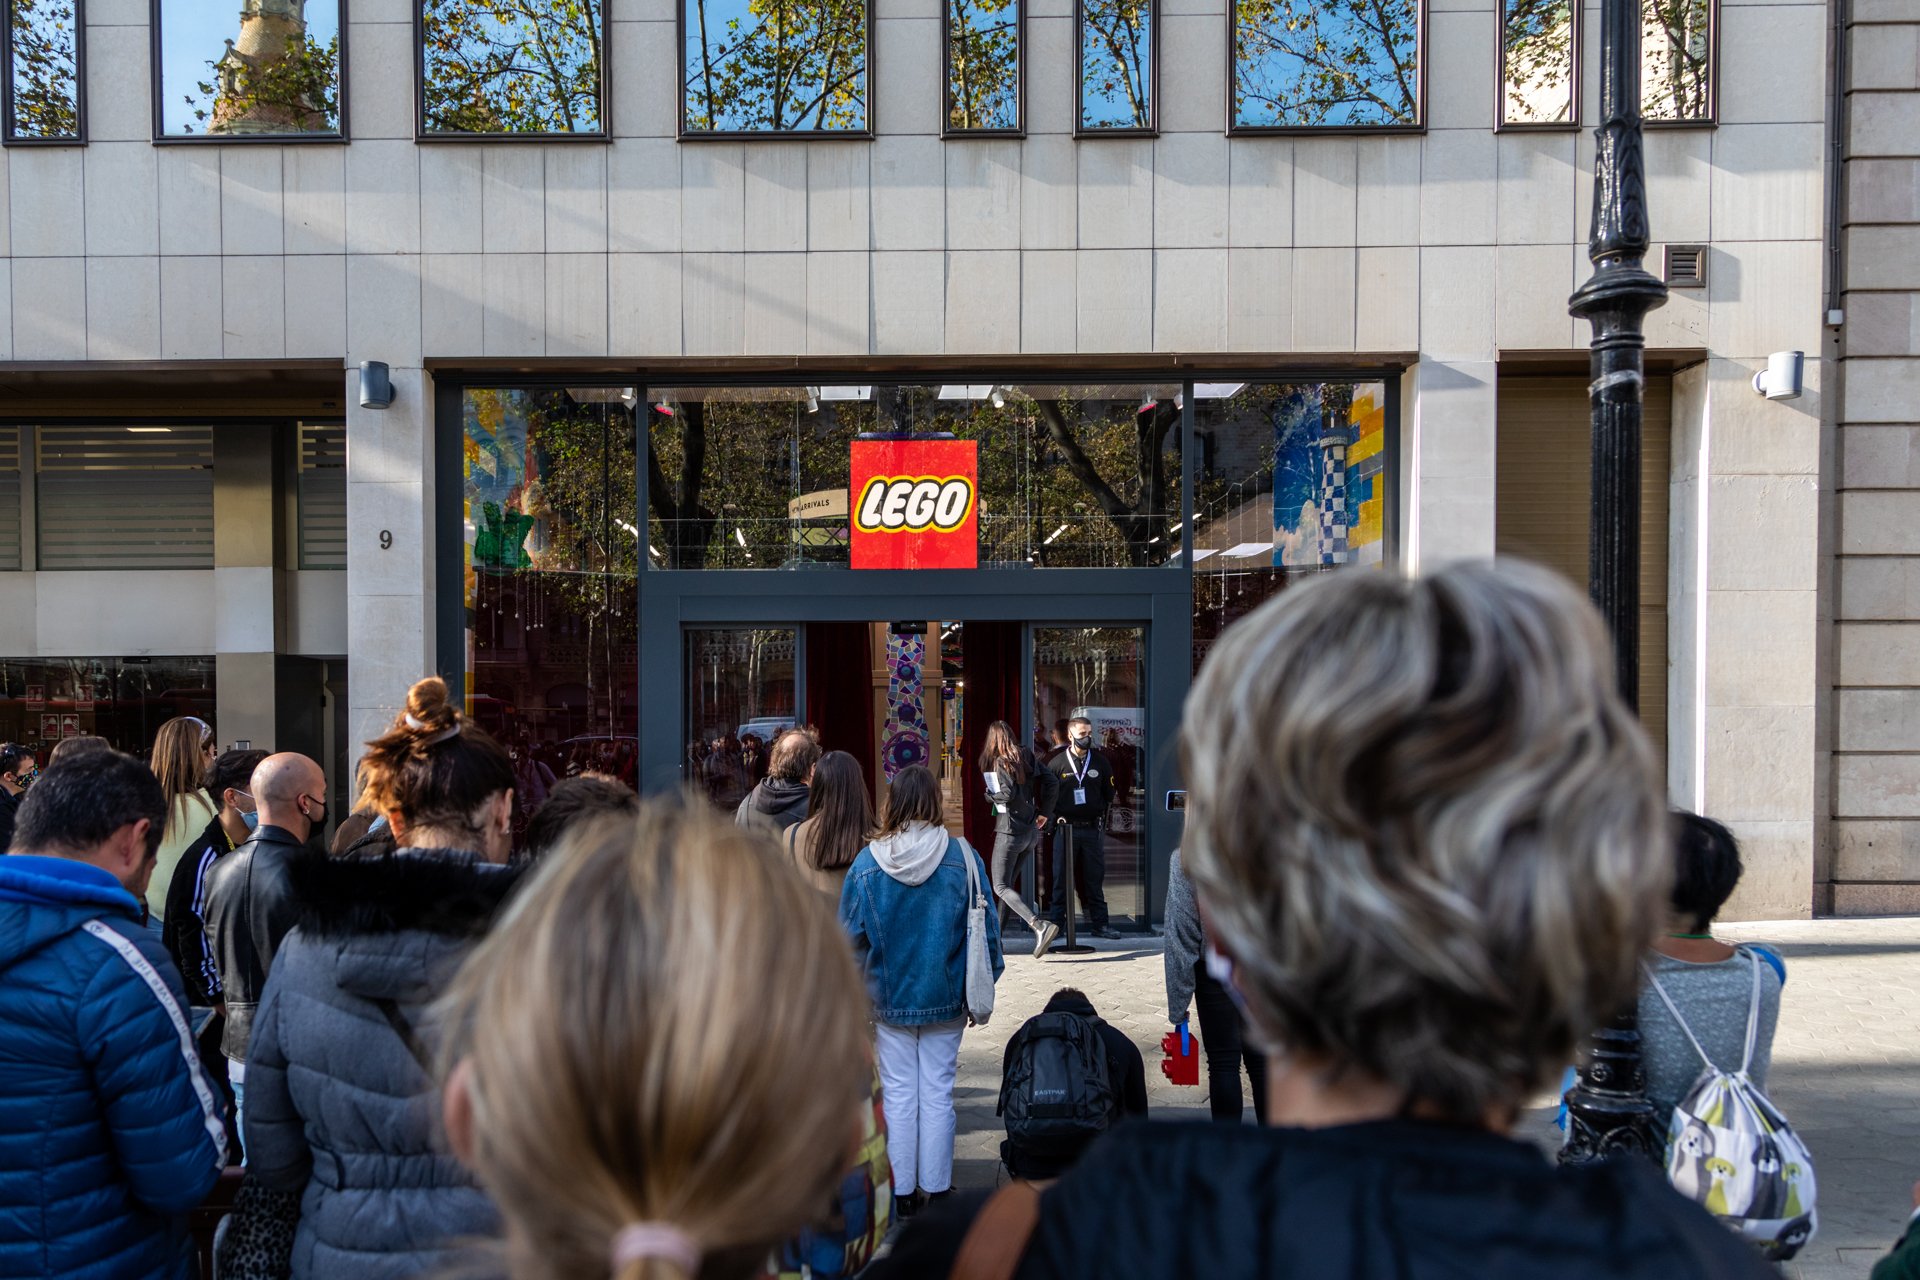 05_LEGO_STORE-5_Y7A7852-268_LOW_RES.JPG